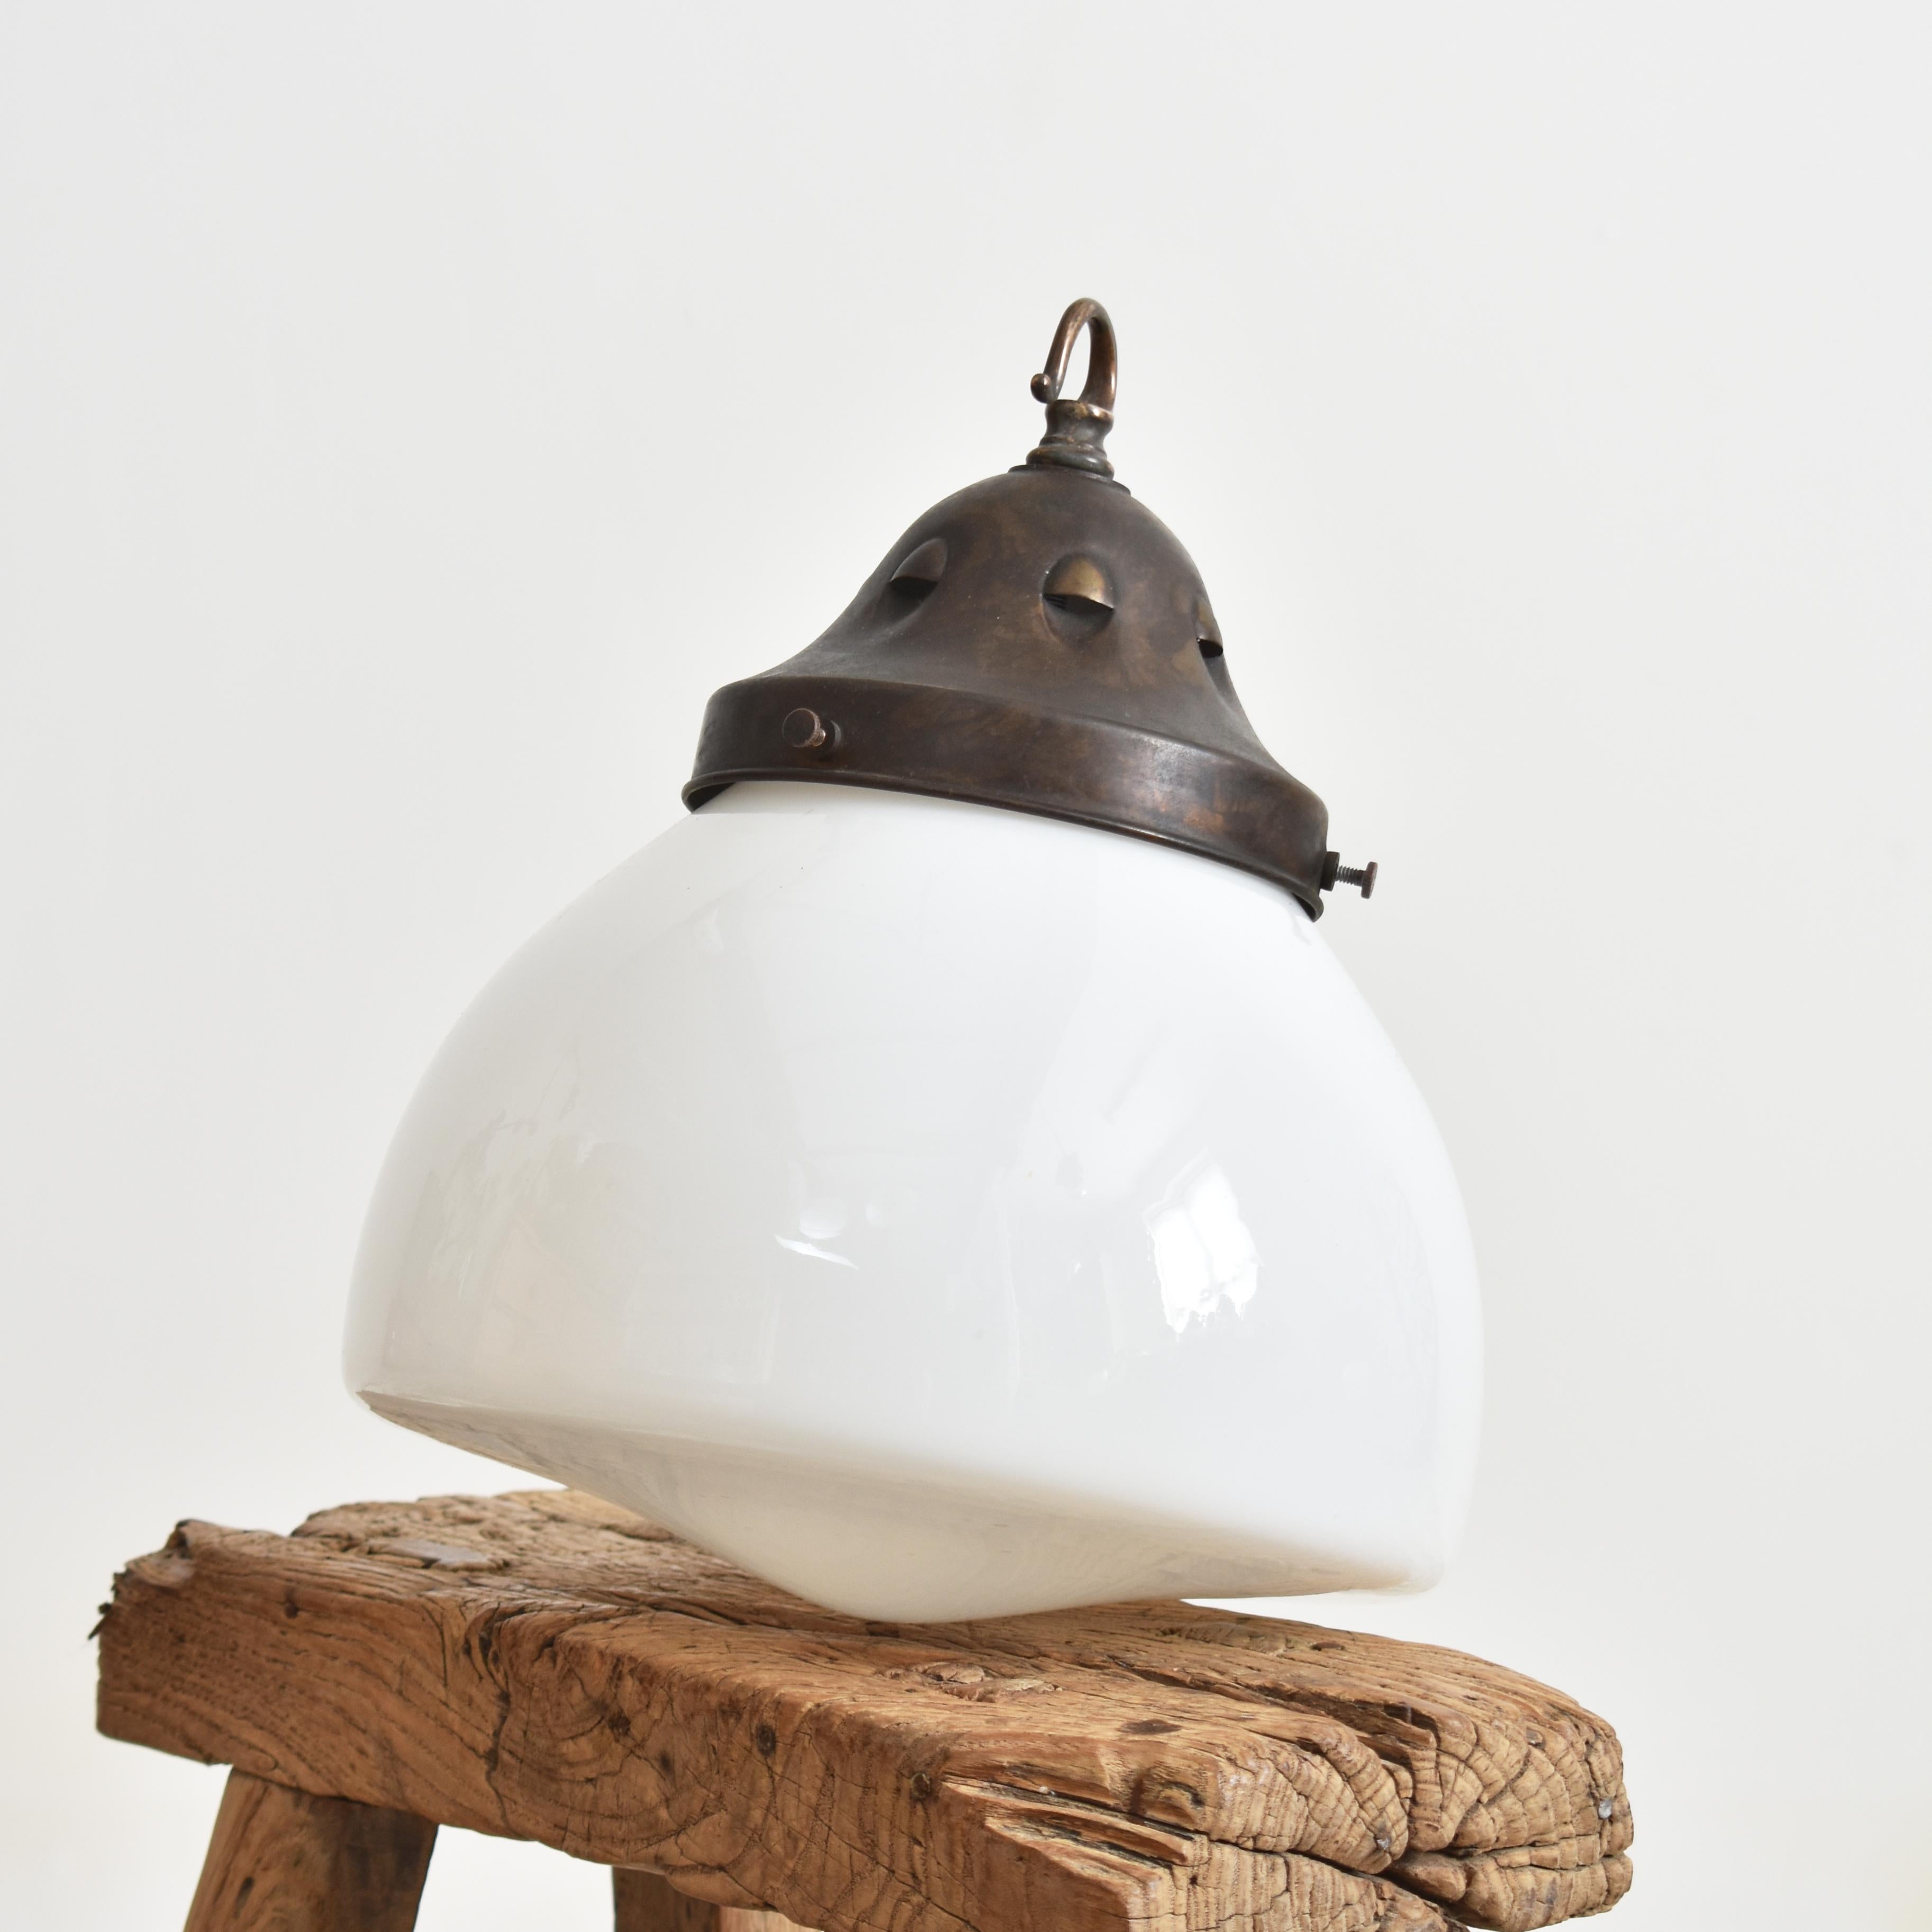 Antique Church Opaline Pendant Light – AB

An original opaline glass pendant light. The light has a milk glass opaline shade and original brass hanging gallery. The gallery finish has been left untouched in it original